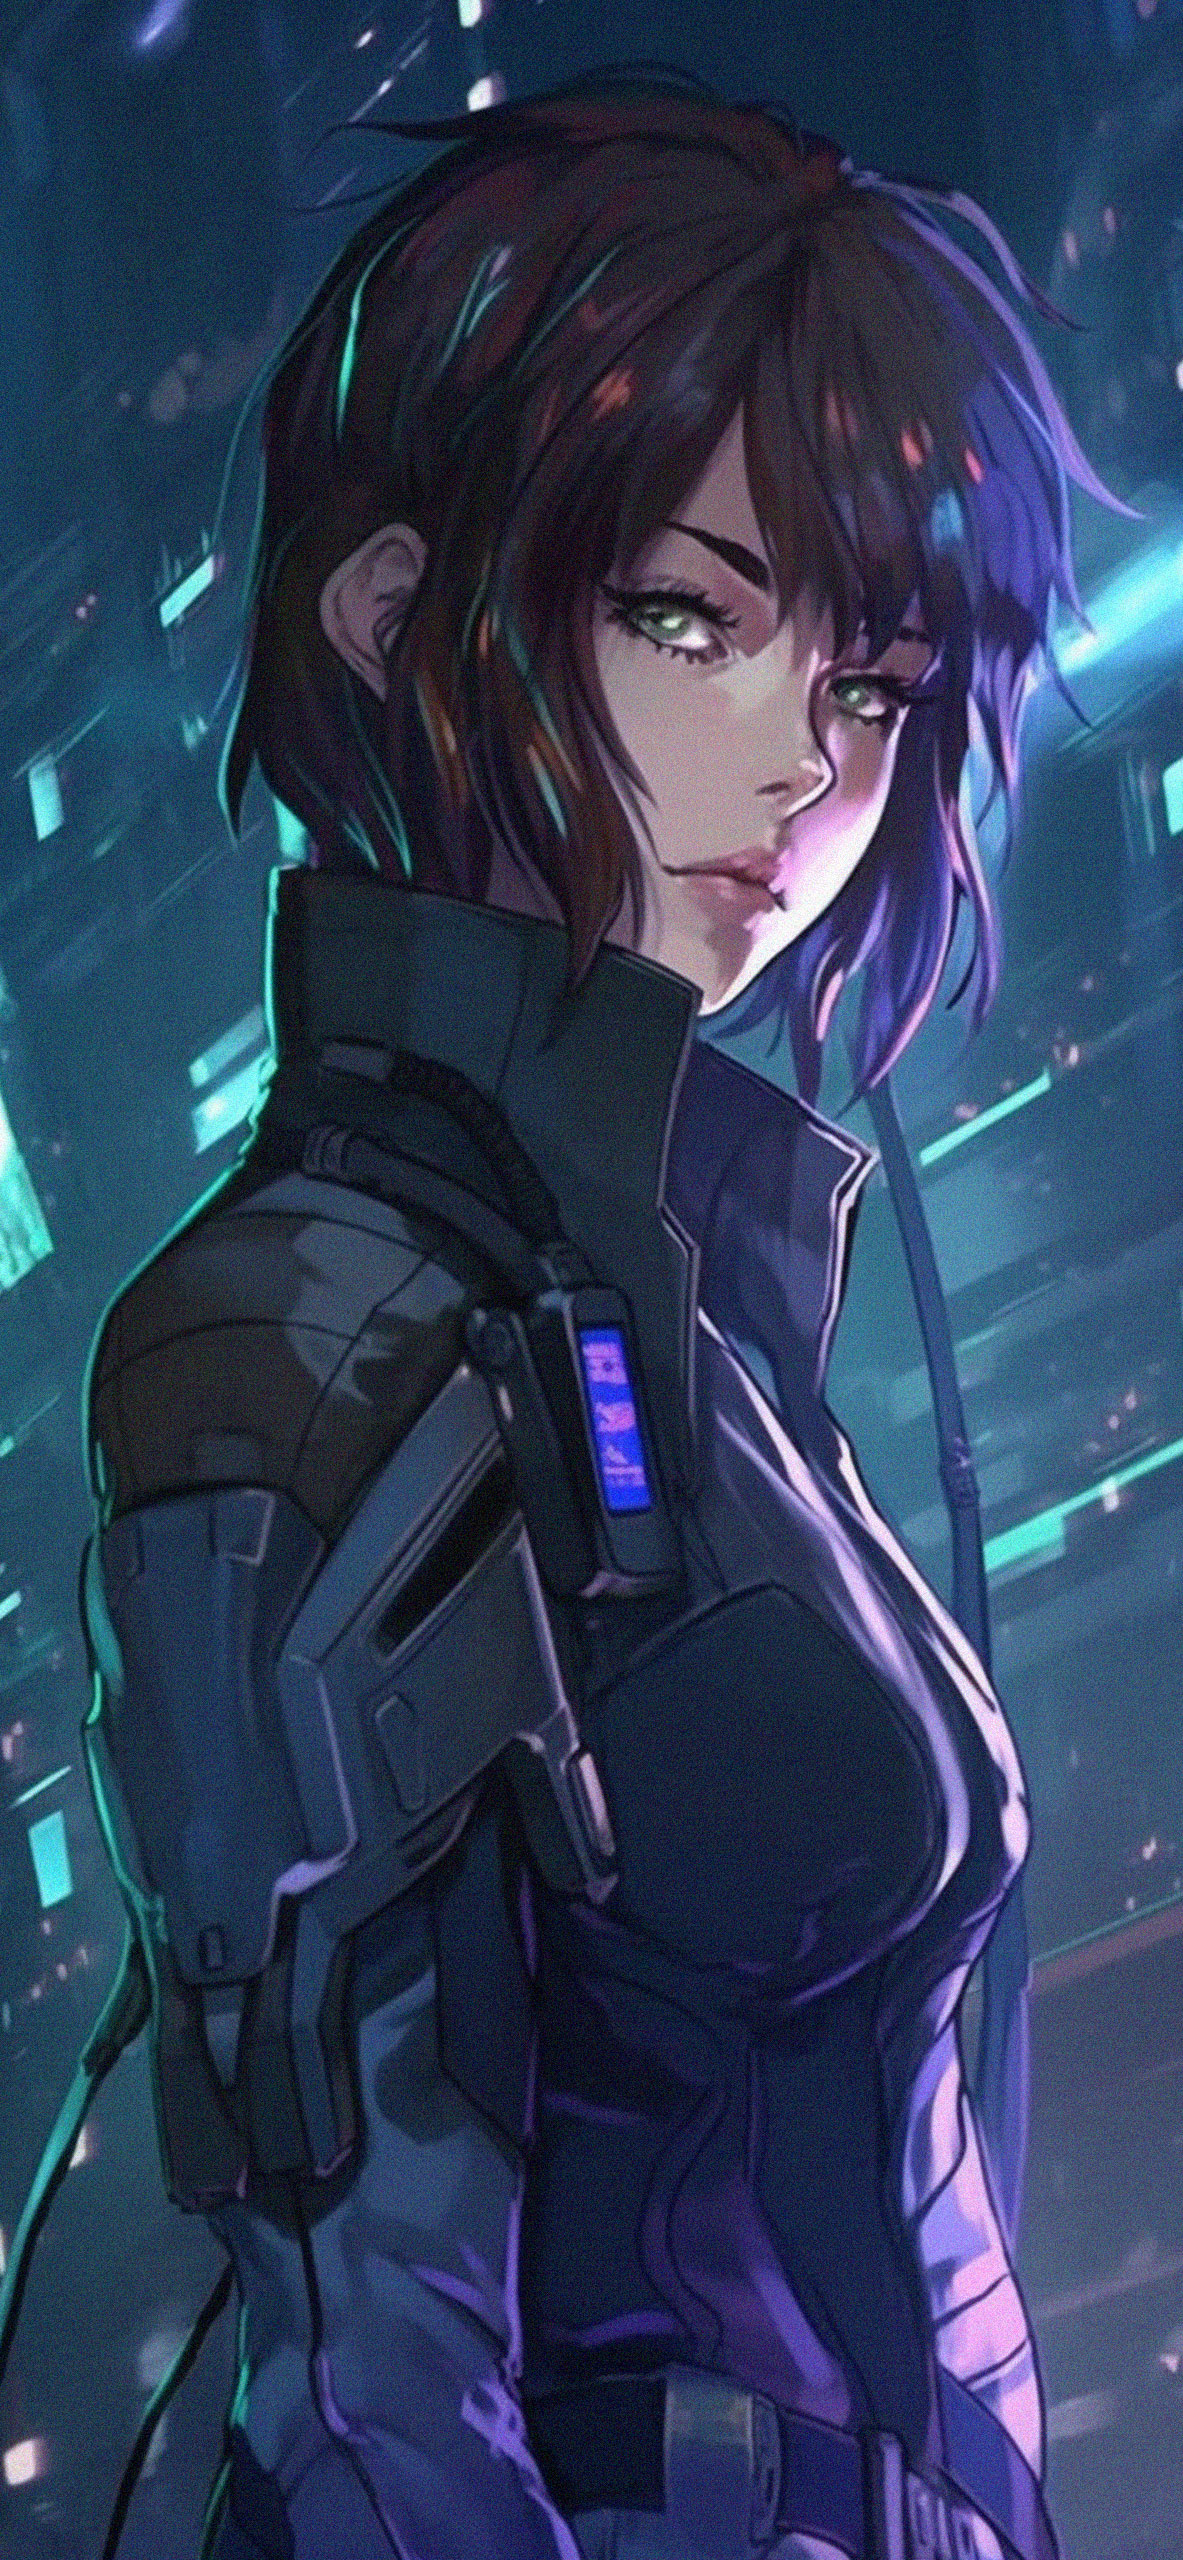 Ghost In The Shell Manga Anime Poster – My Hot Posters